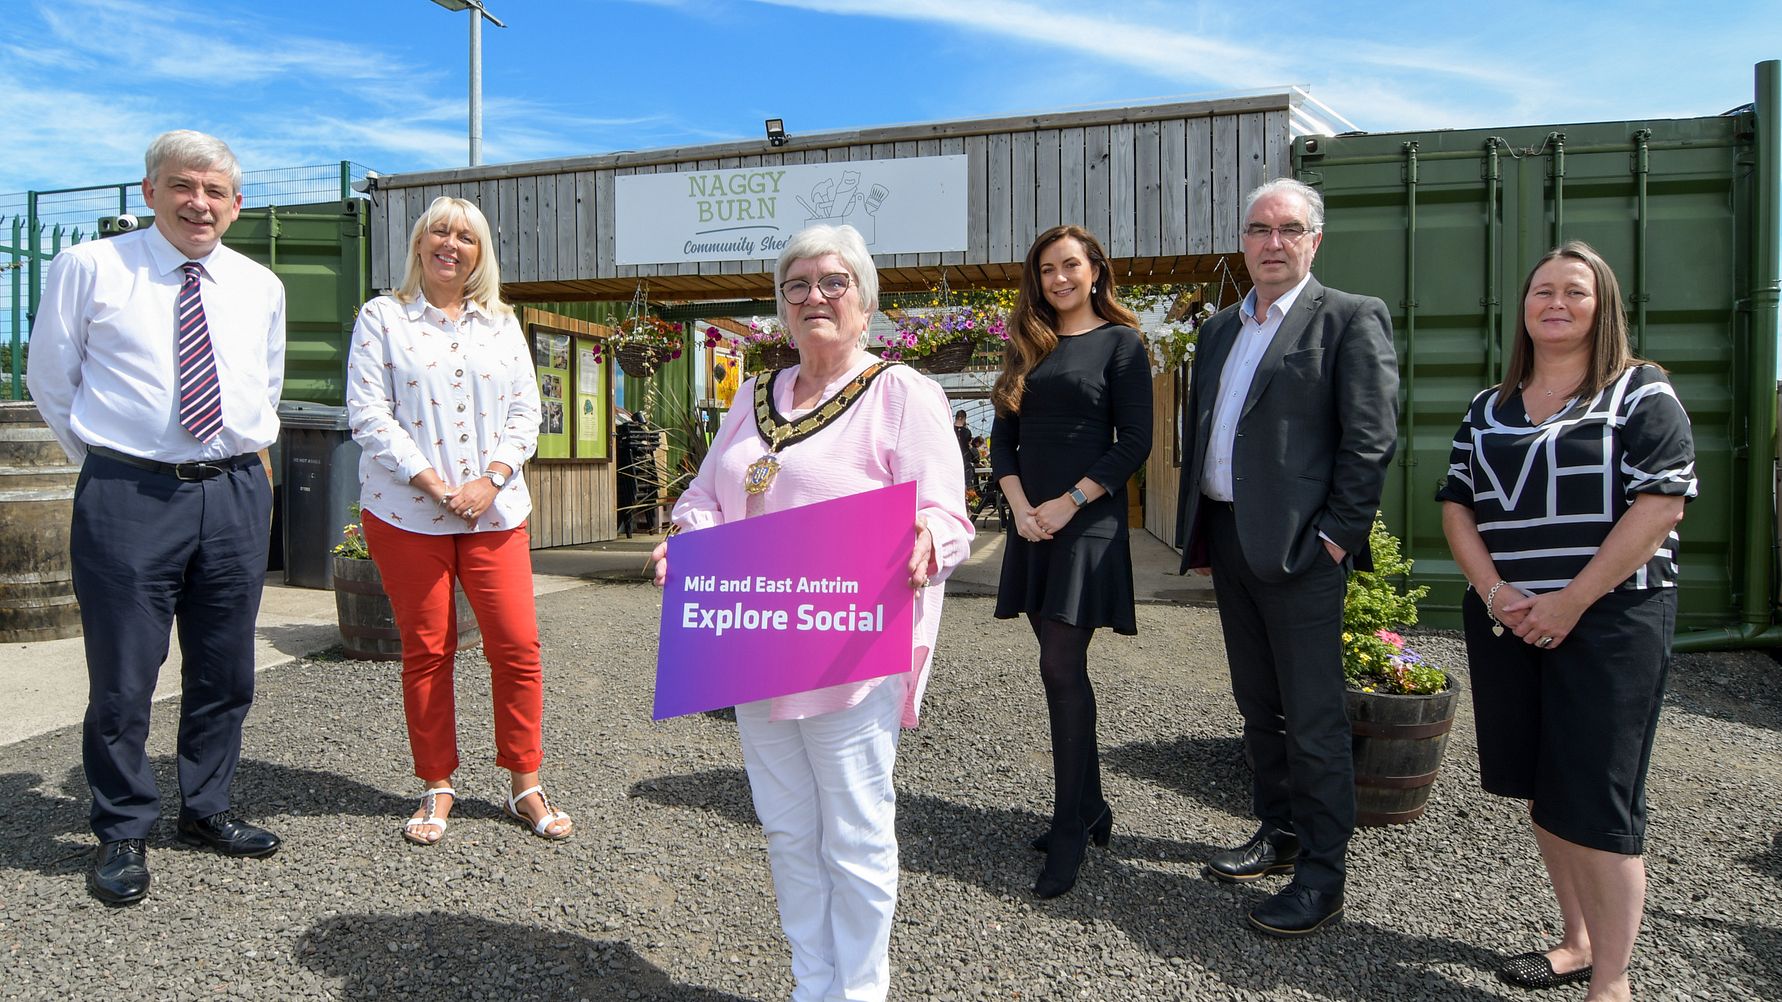 Council launches programme focused on enterprising ideas for social businesses